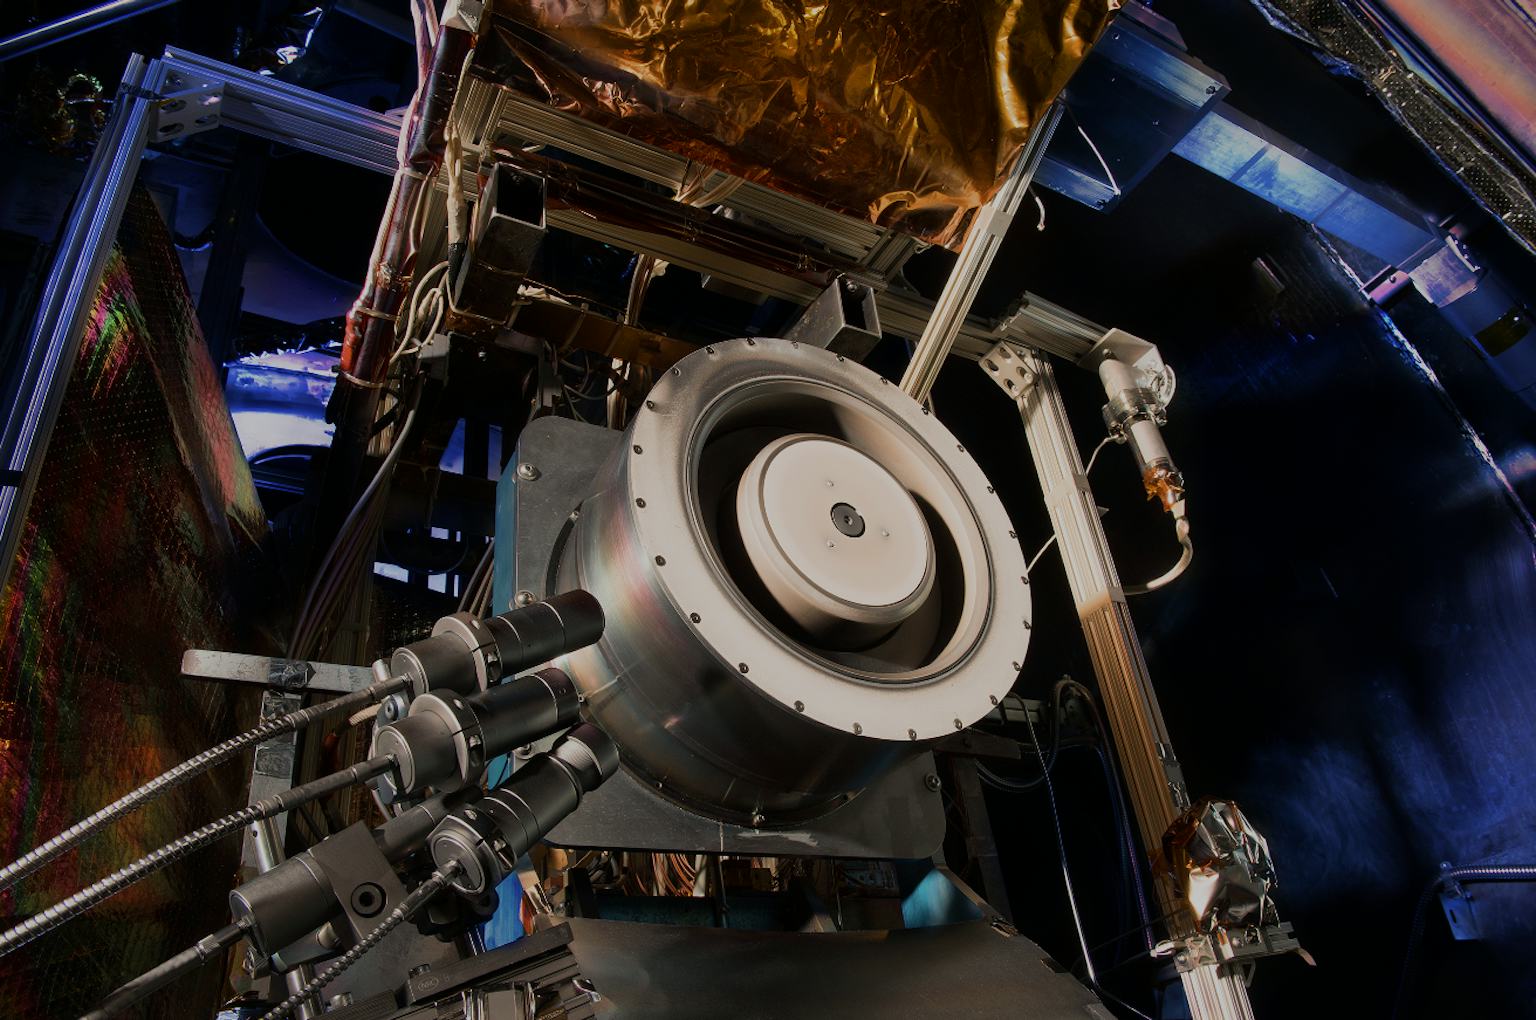 NASA Will Test a Solar Electric Propulsion System on the Asteroid